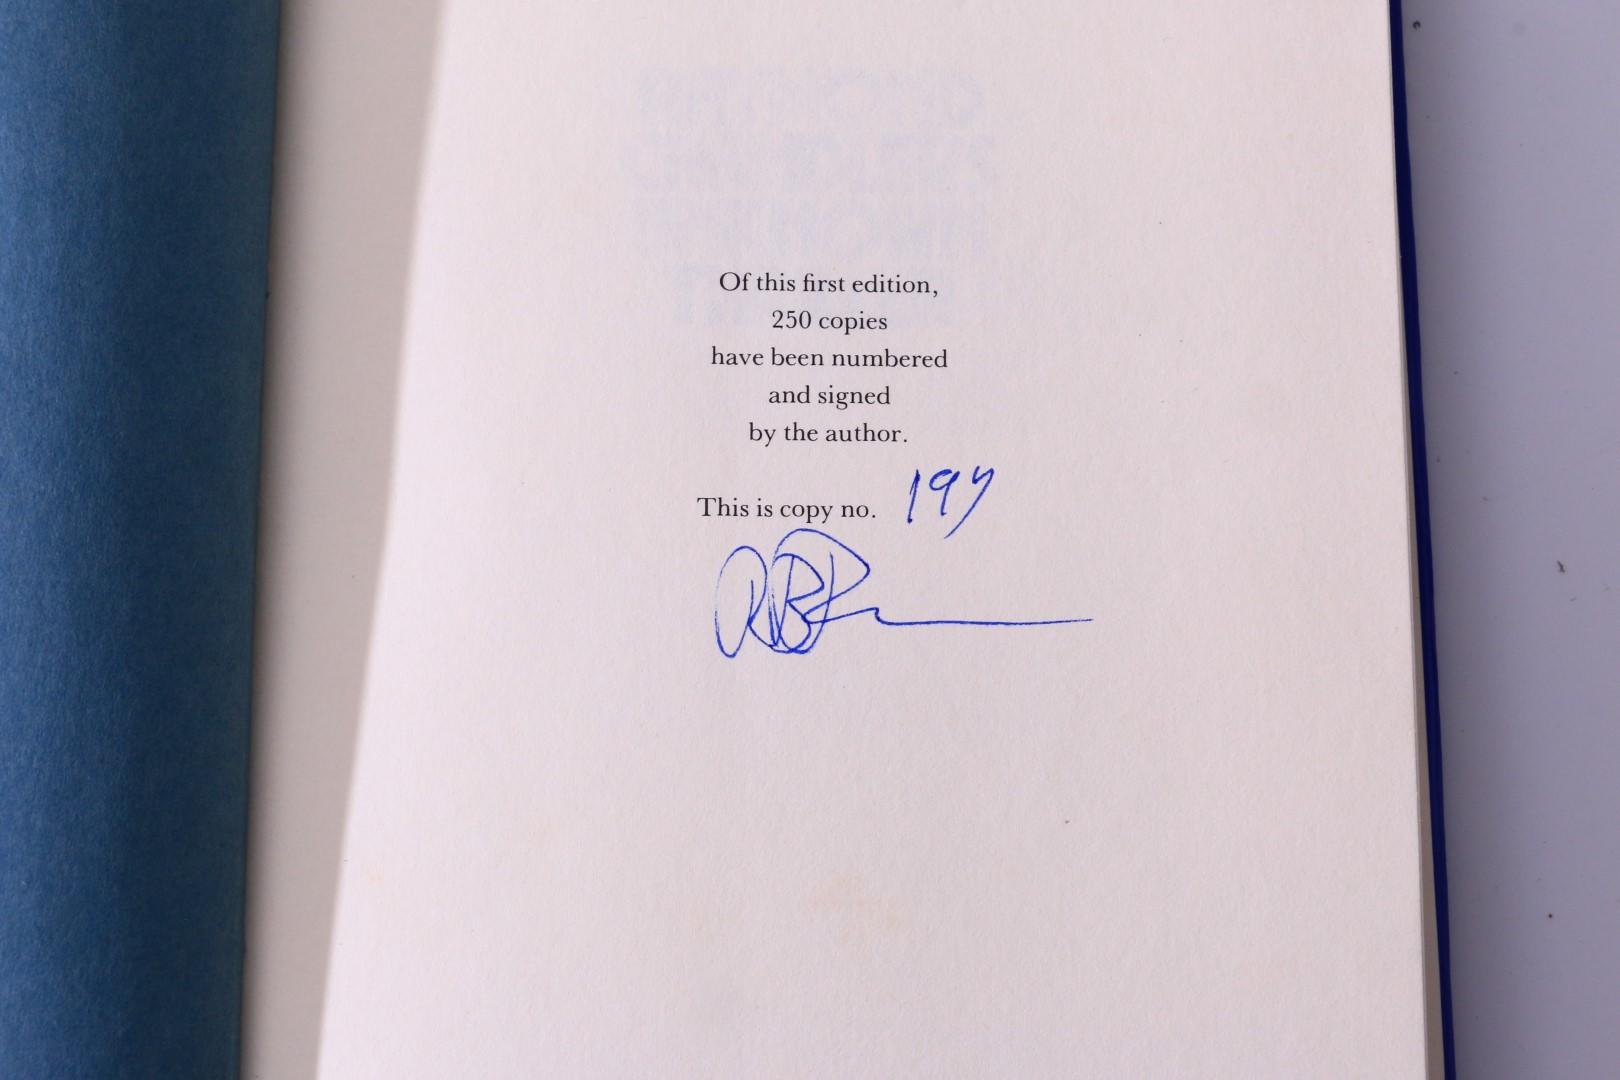 Raymond Chandler - Raymond Chandler's Unknown Thriller: The Screenplay of Playback - Mysterious Press, 1985, Signed Limited Edition.